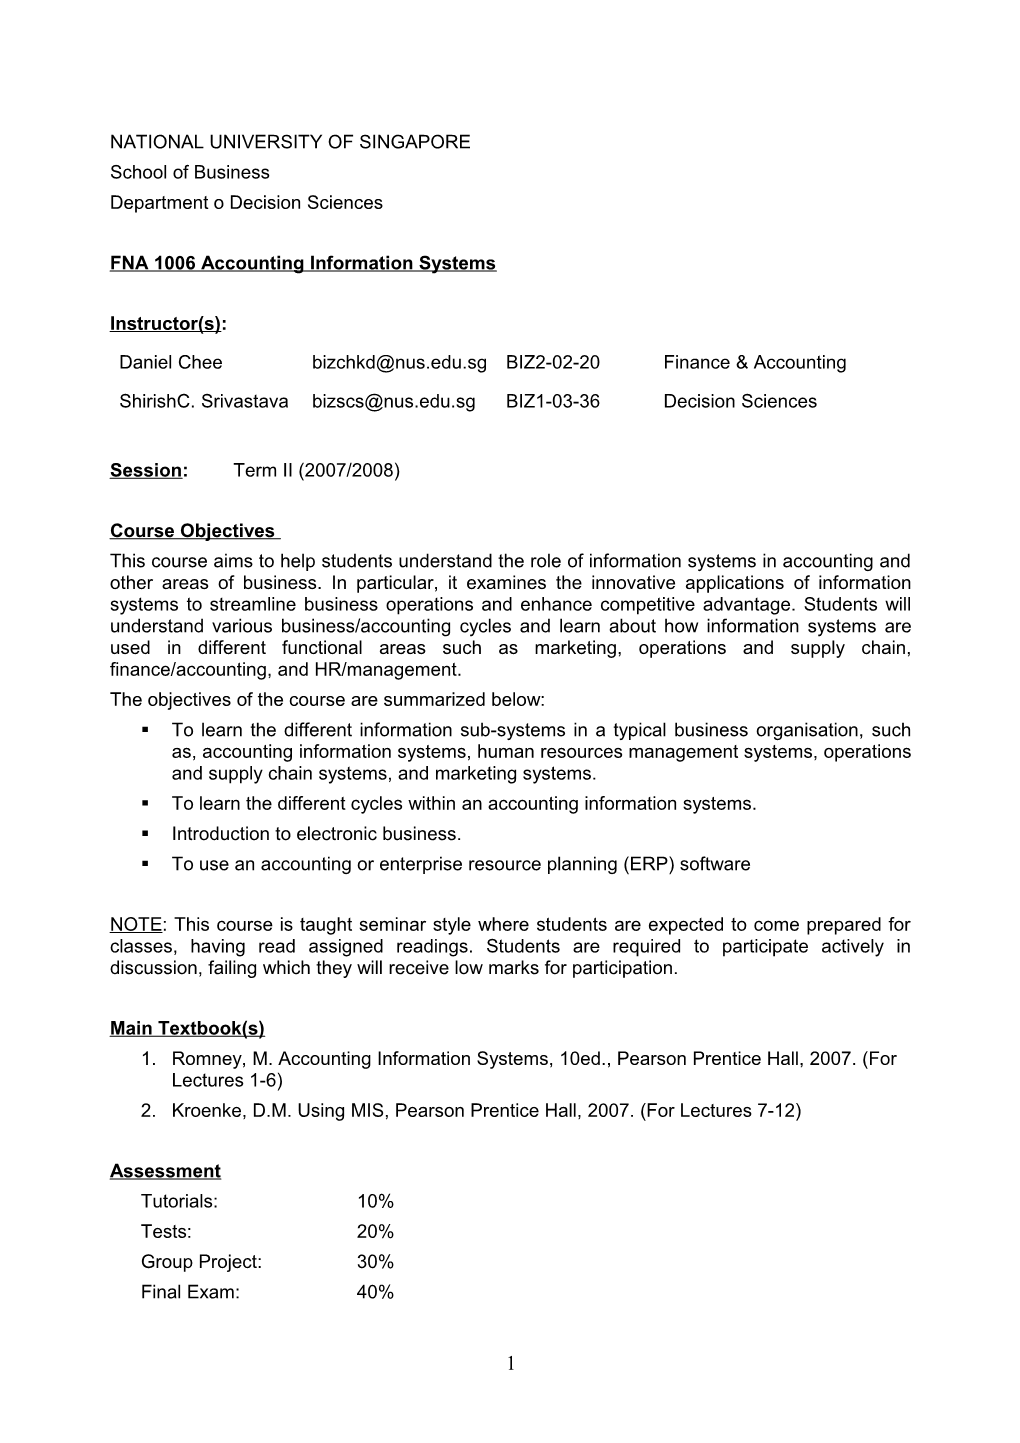 FNA 1006 Accounting Information Systems